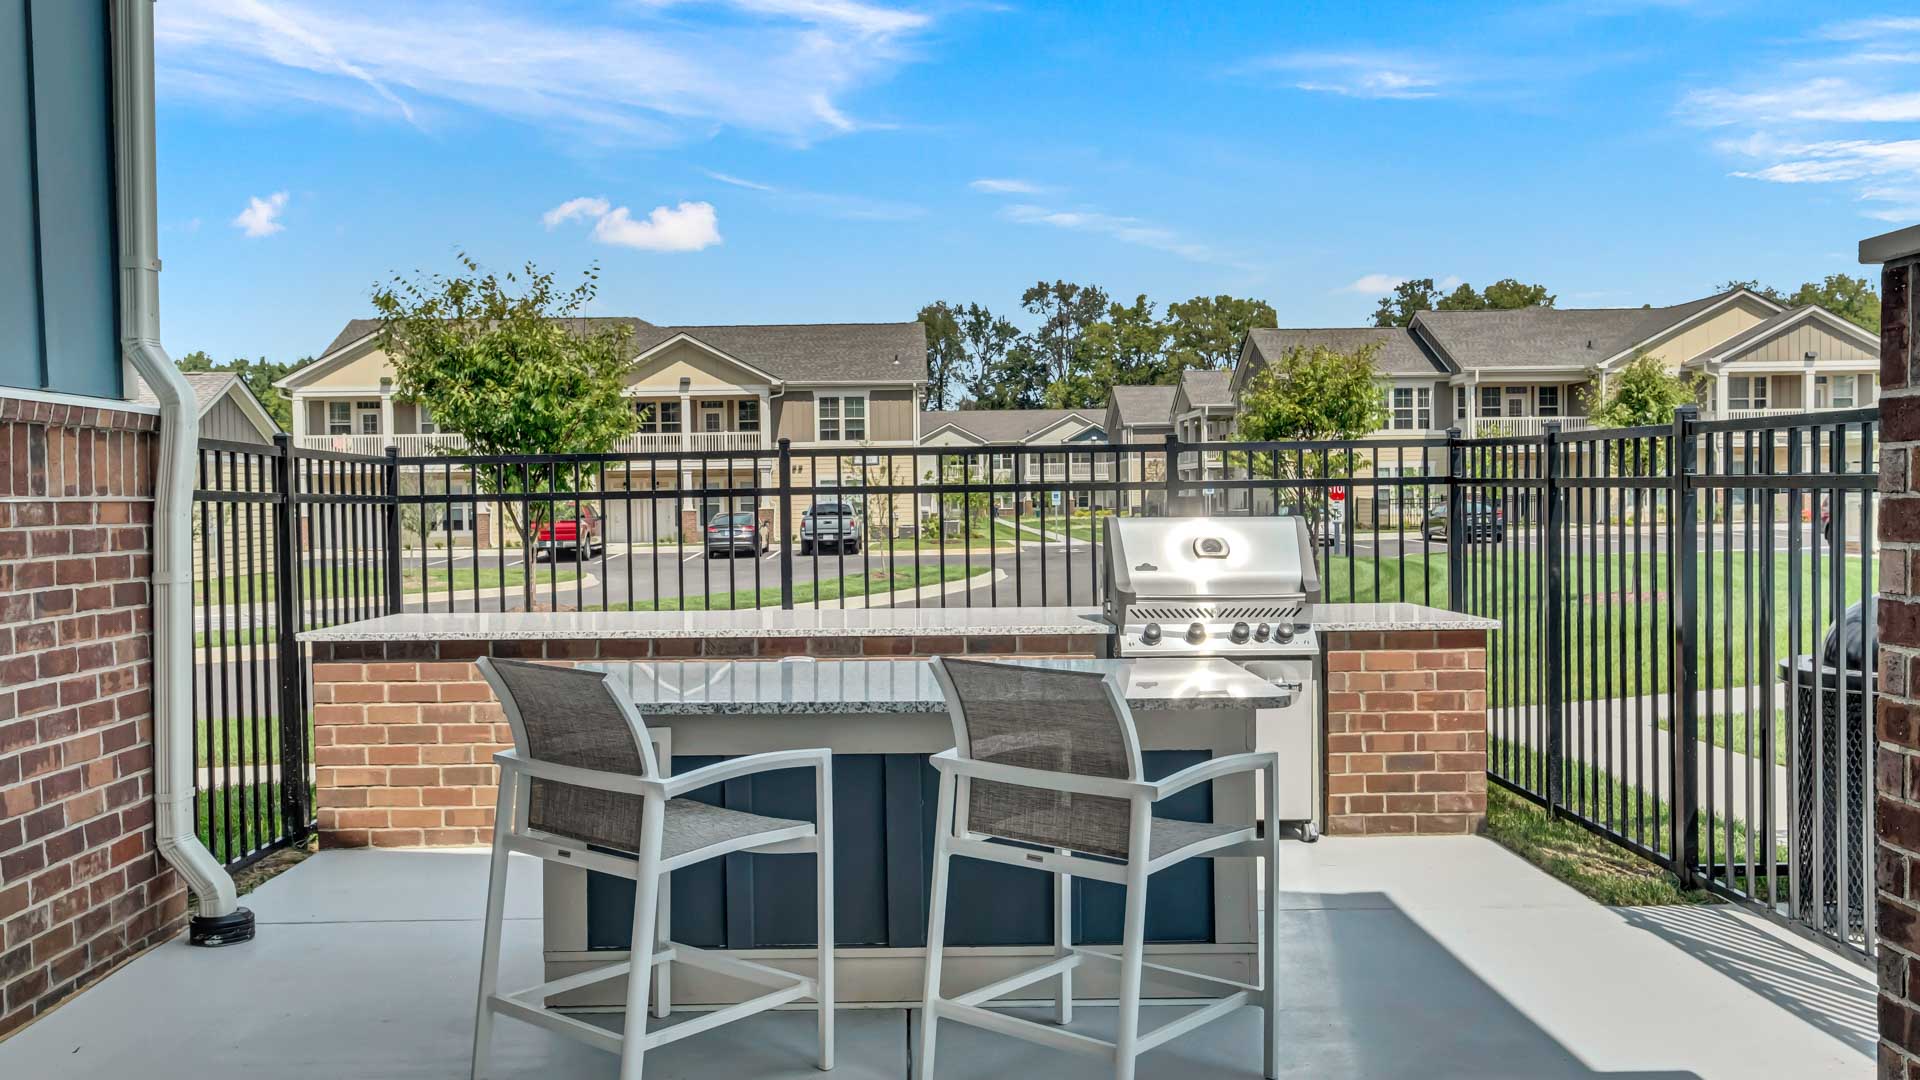 Grill Station near the Pool at Springs at La Grange Apartments in East Louisville, KY-17